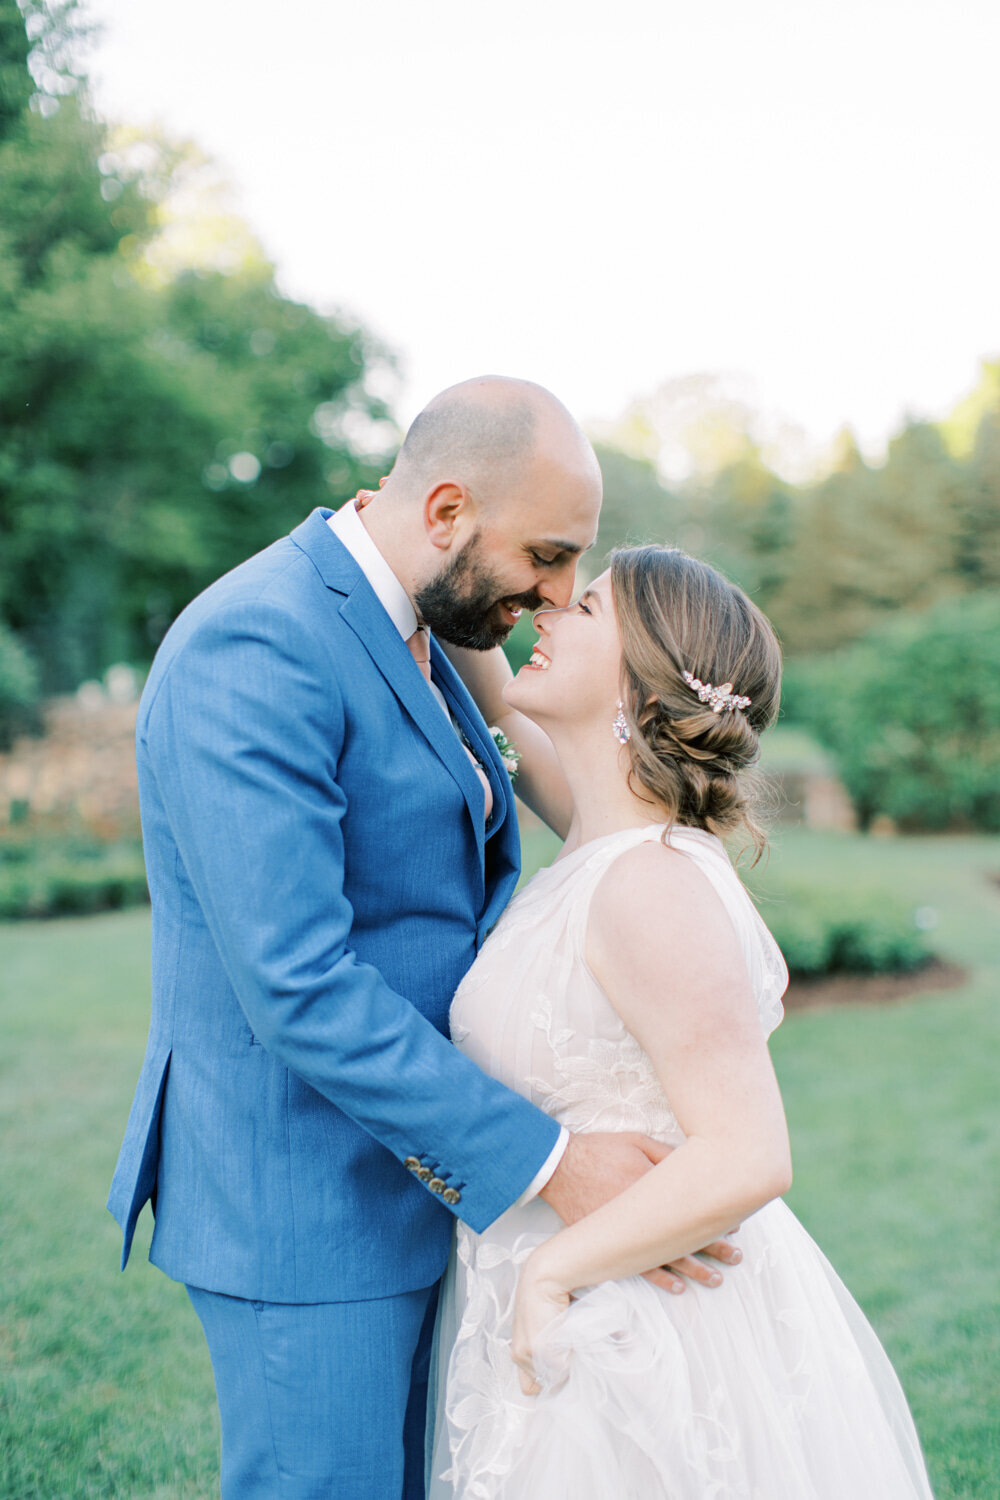 Bride and Groom about to kiss | Greencrest Manor | Jeannine Lillie Events | Wedding Photography in Pittsburgh PA | Anna Laero